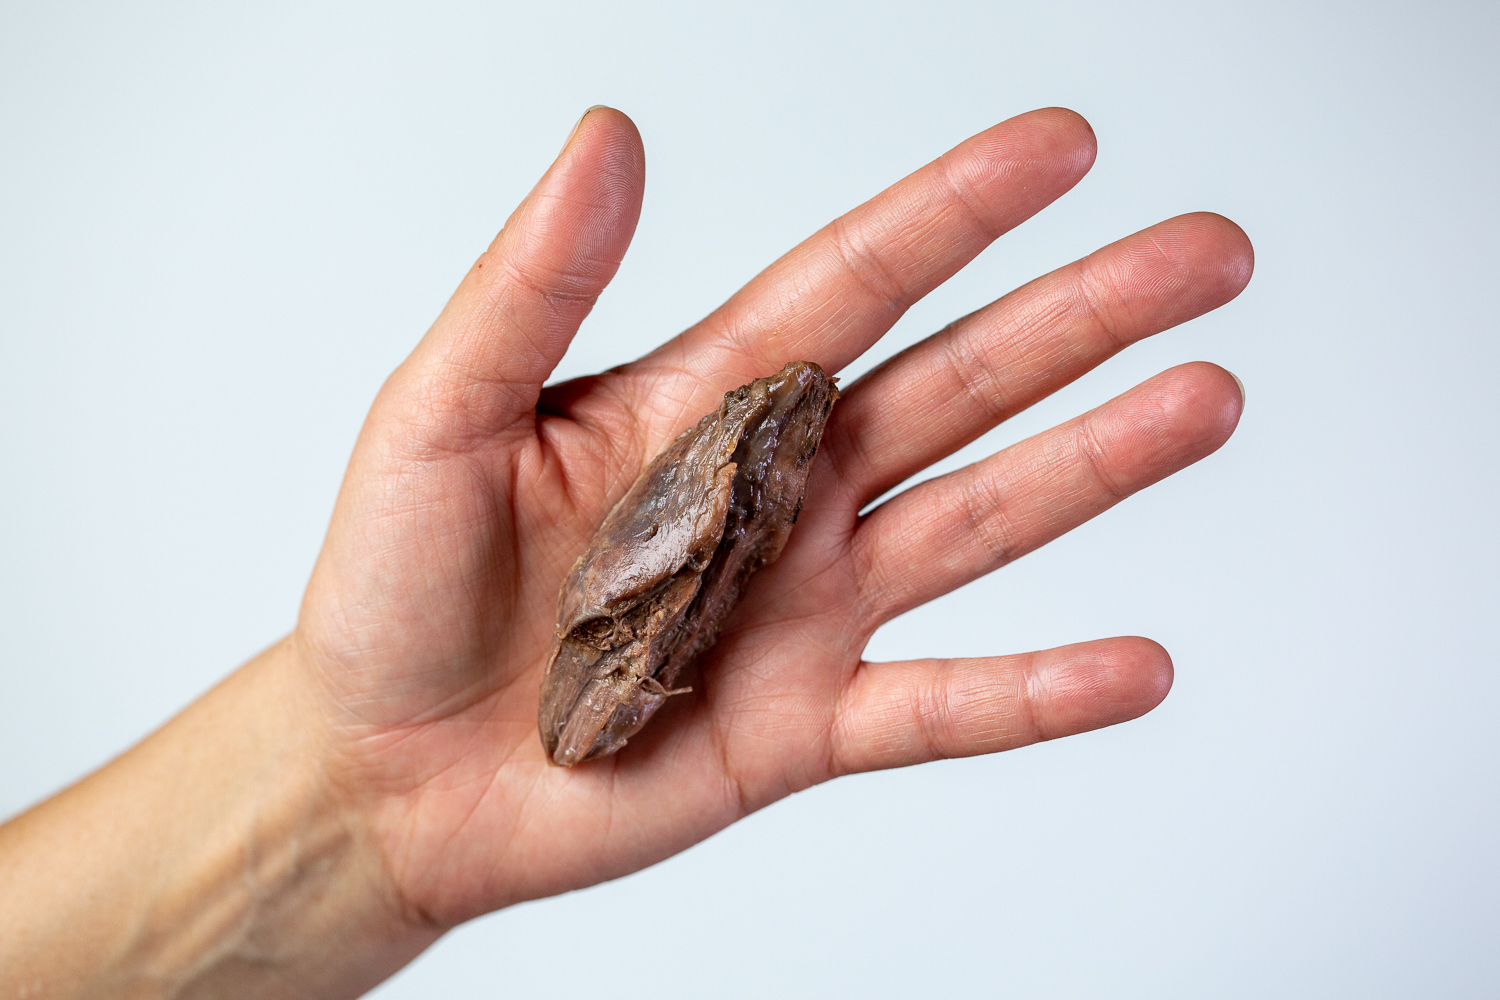 a hand holding a strip of lamb meat the size of two adult fingers pressed together